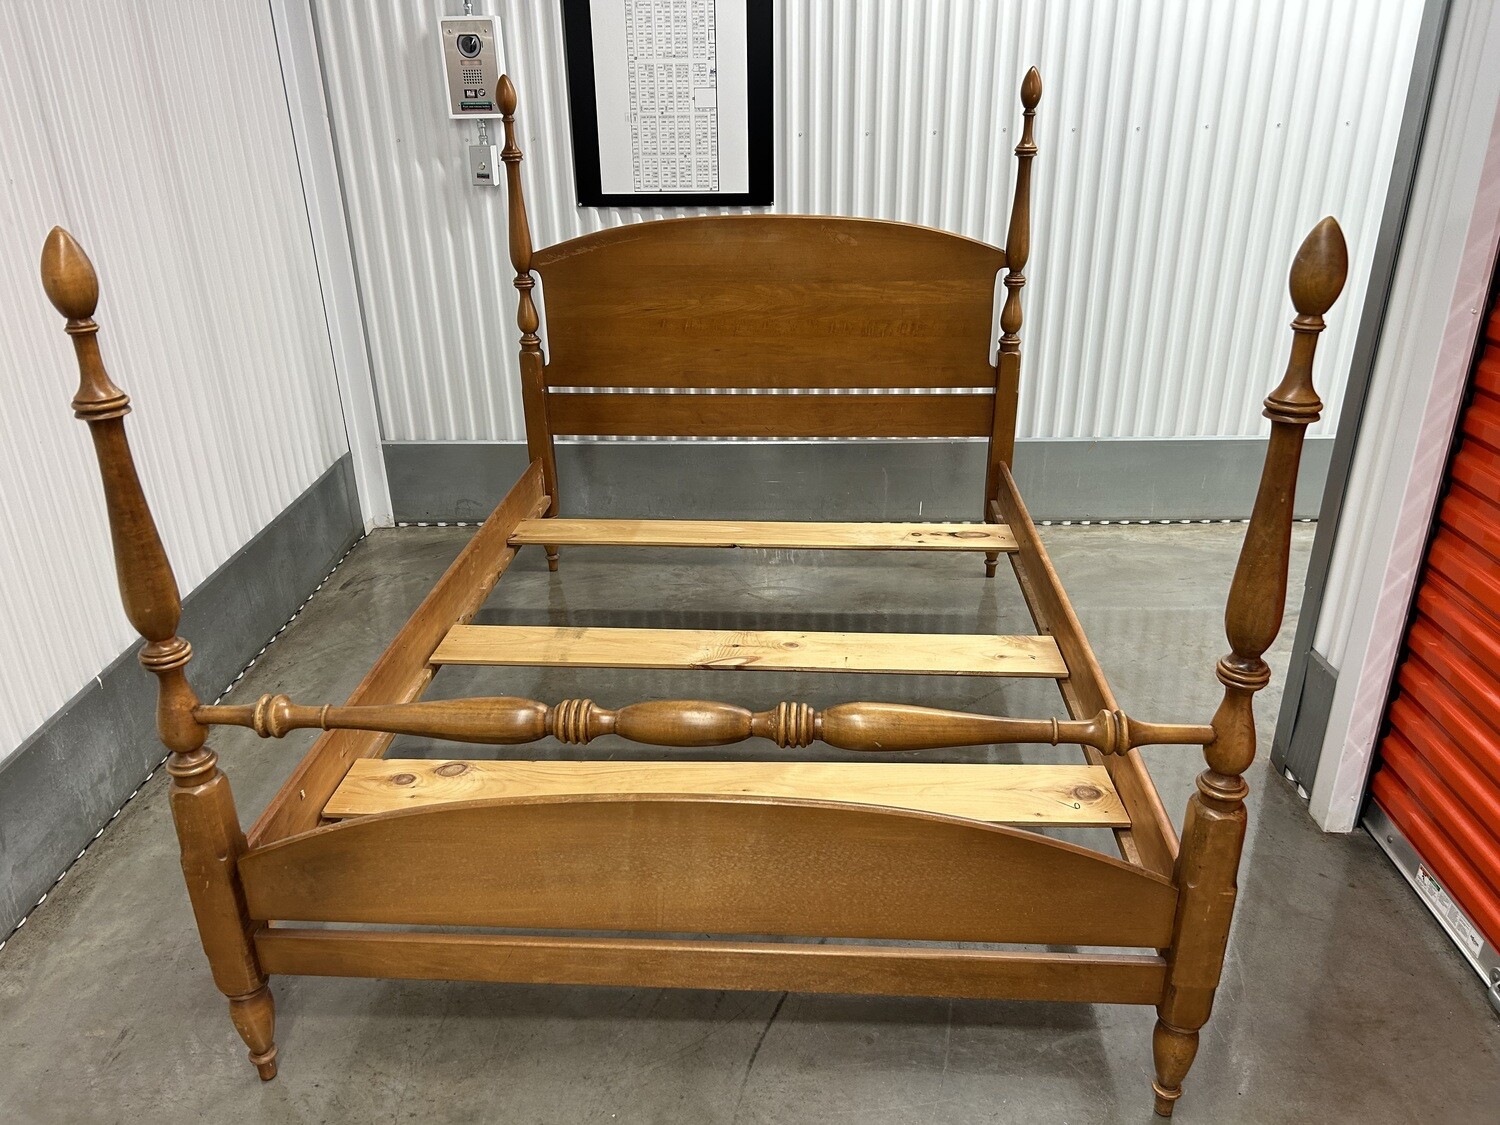 Vintage Full-size 4-poster Maple Bed #2118 ** 2 mos. to sell, full price